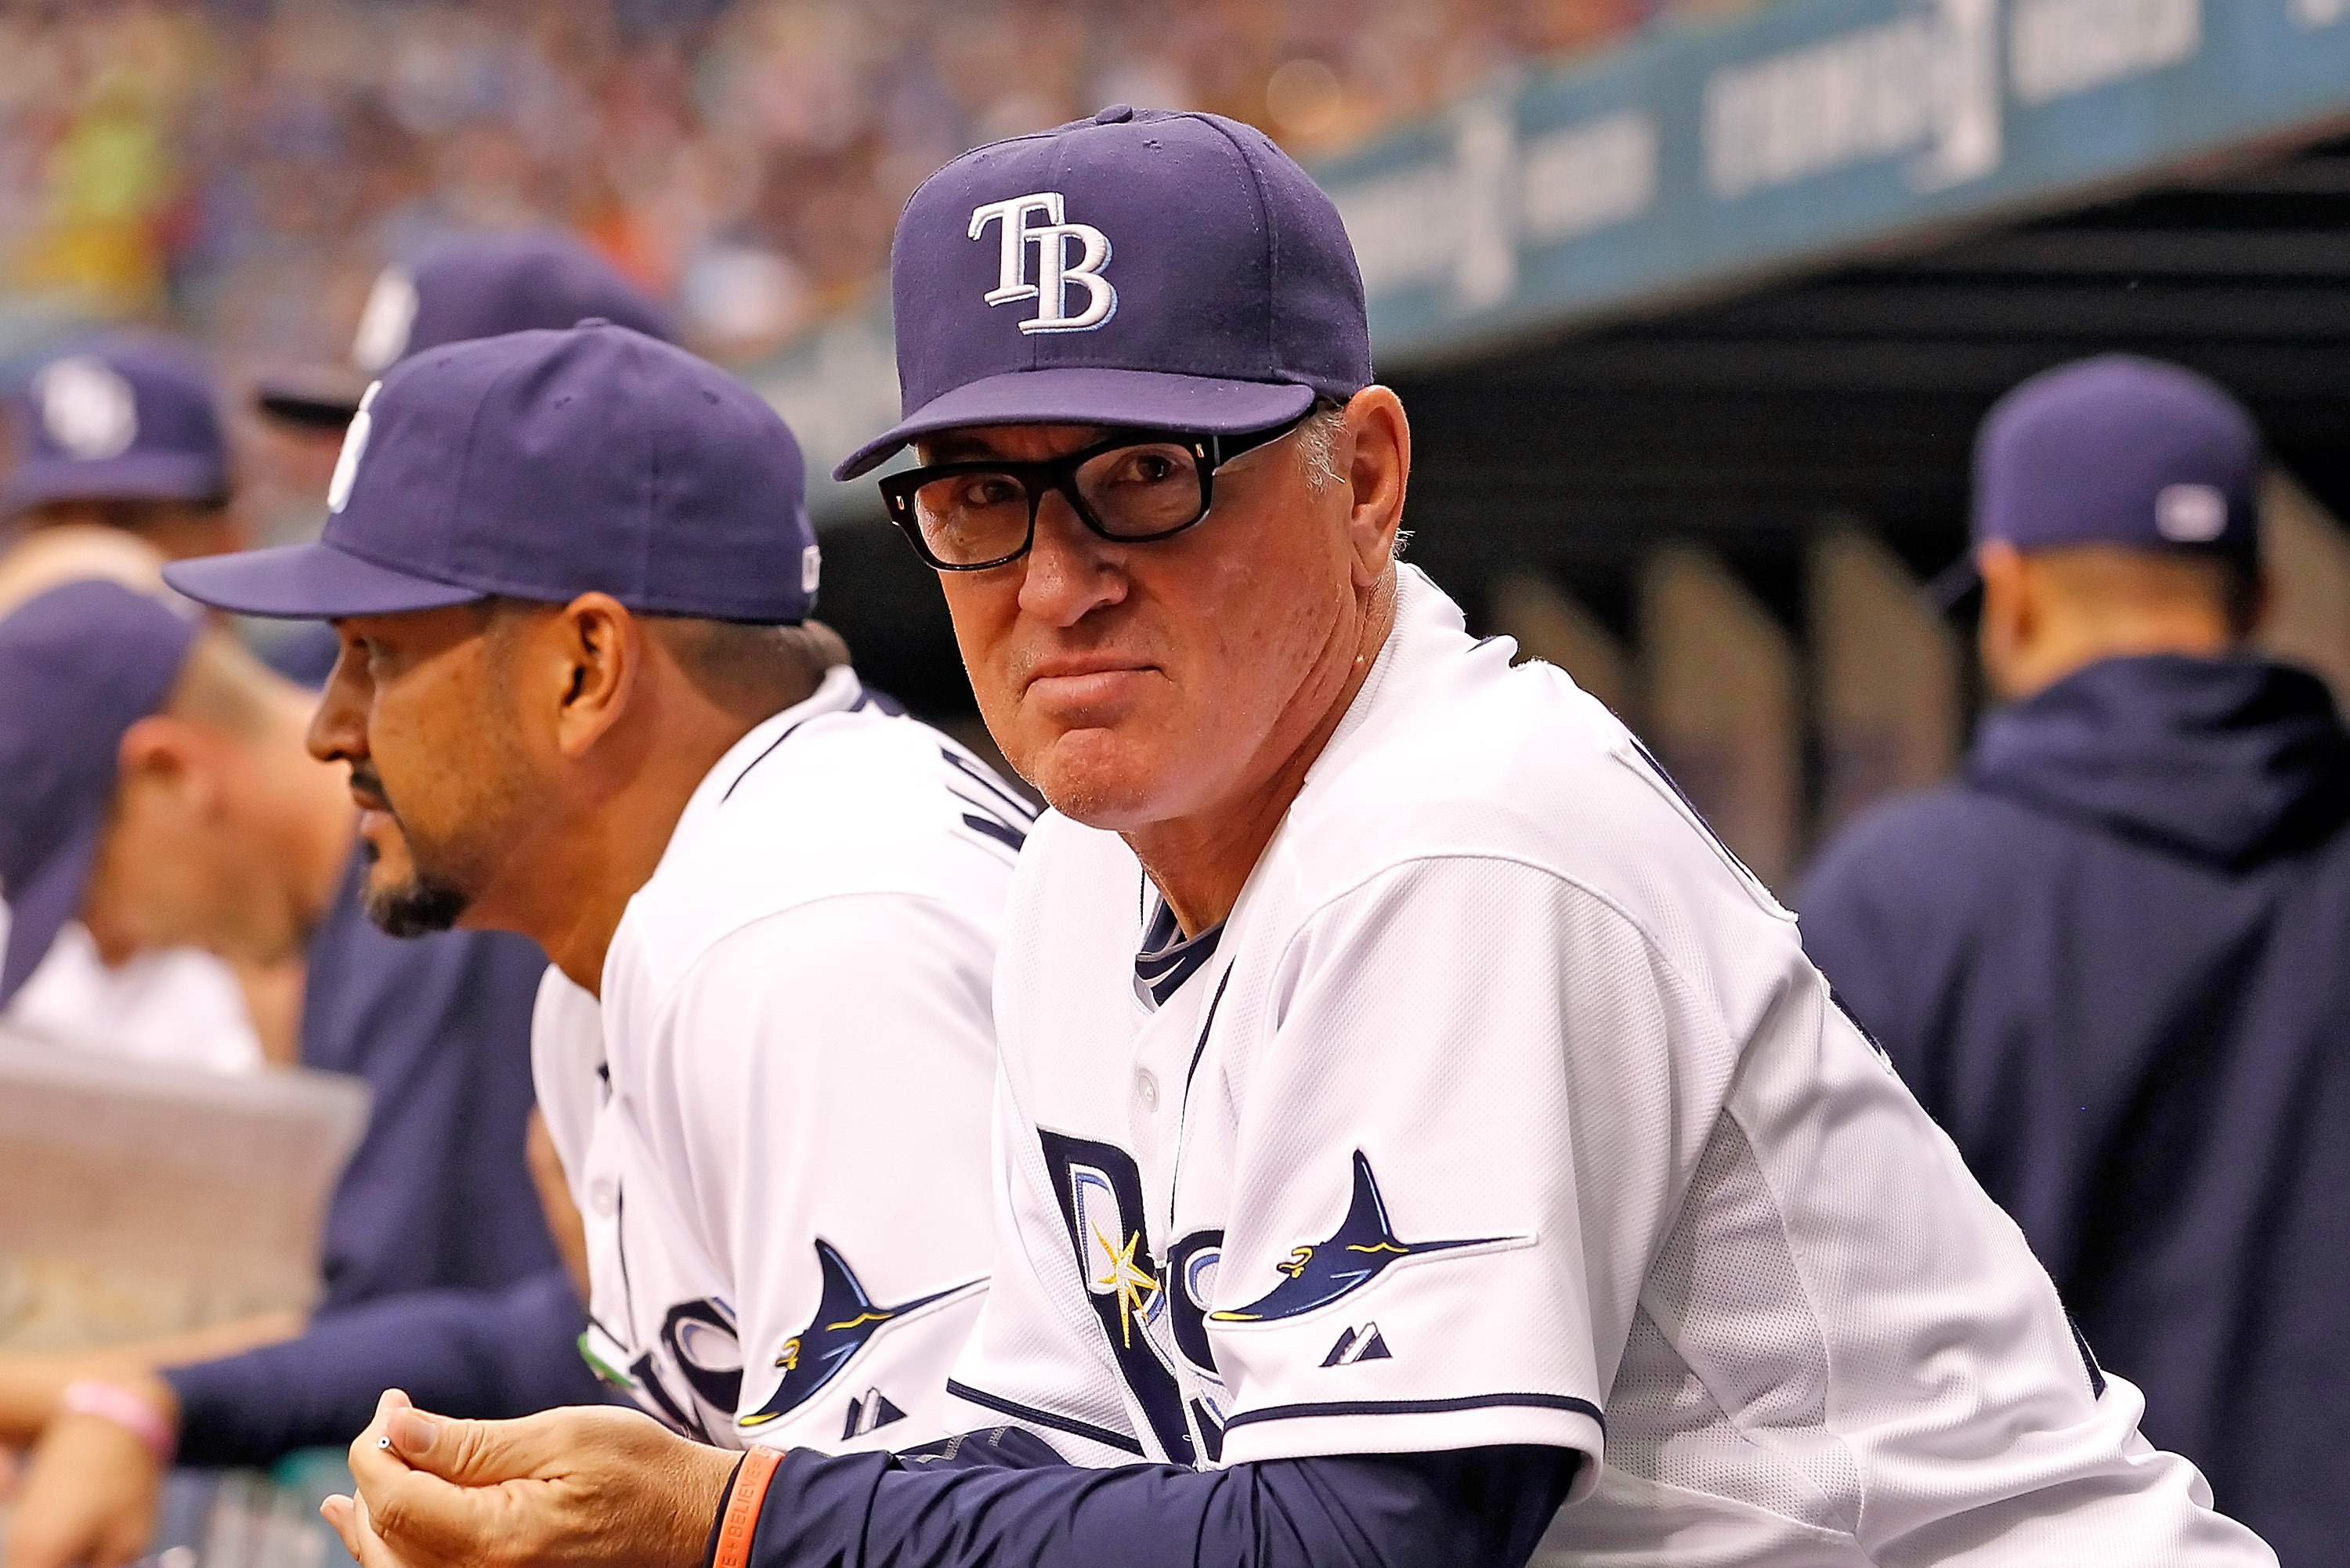 Nobody cares about the Tampa Bay Rays